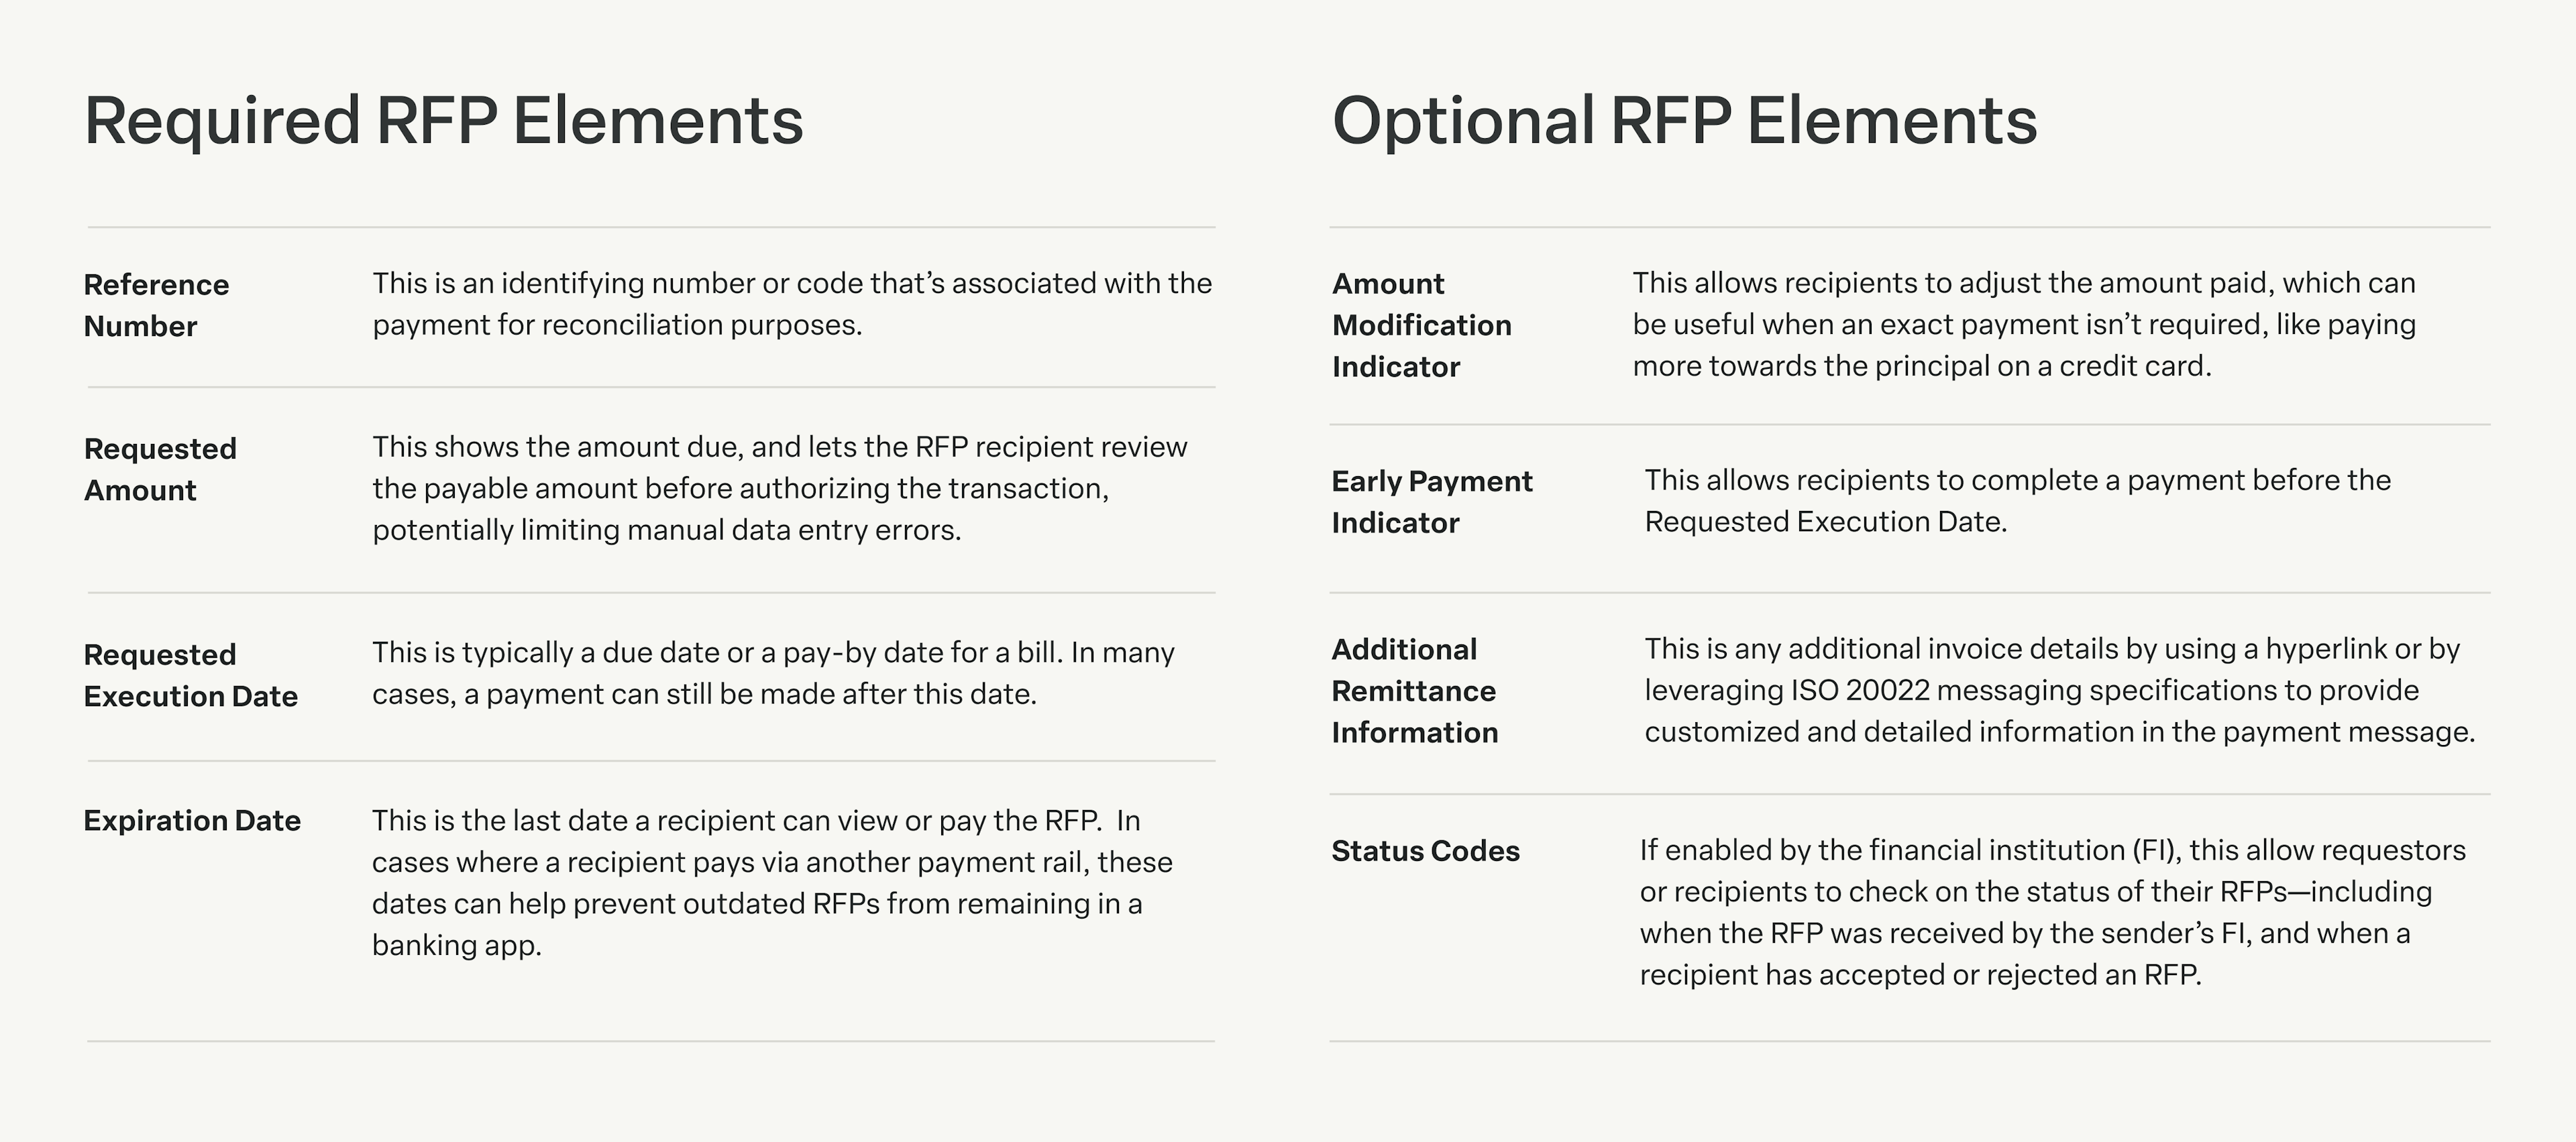 A look at the required vs. optional elements for RFP transaction data